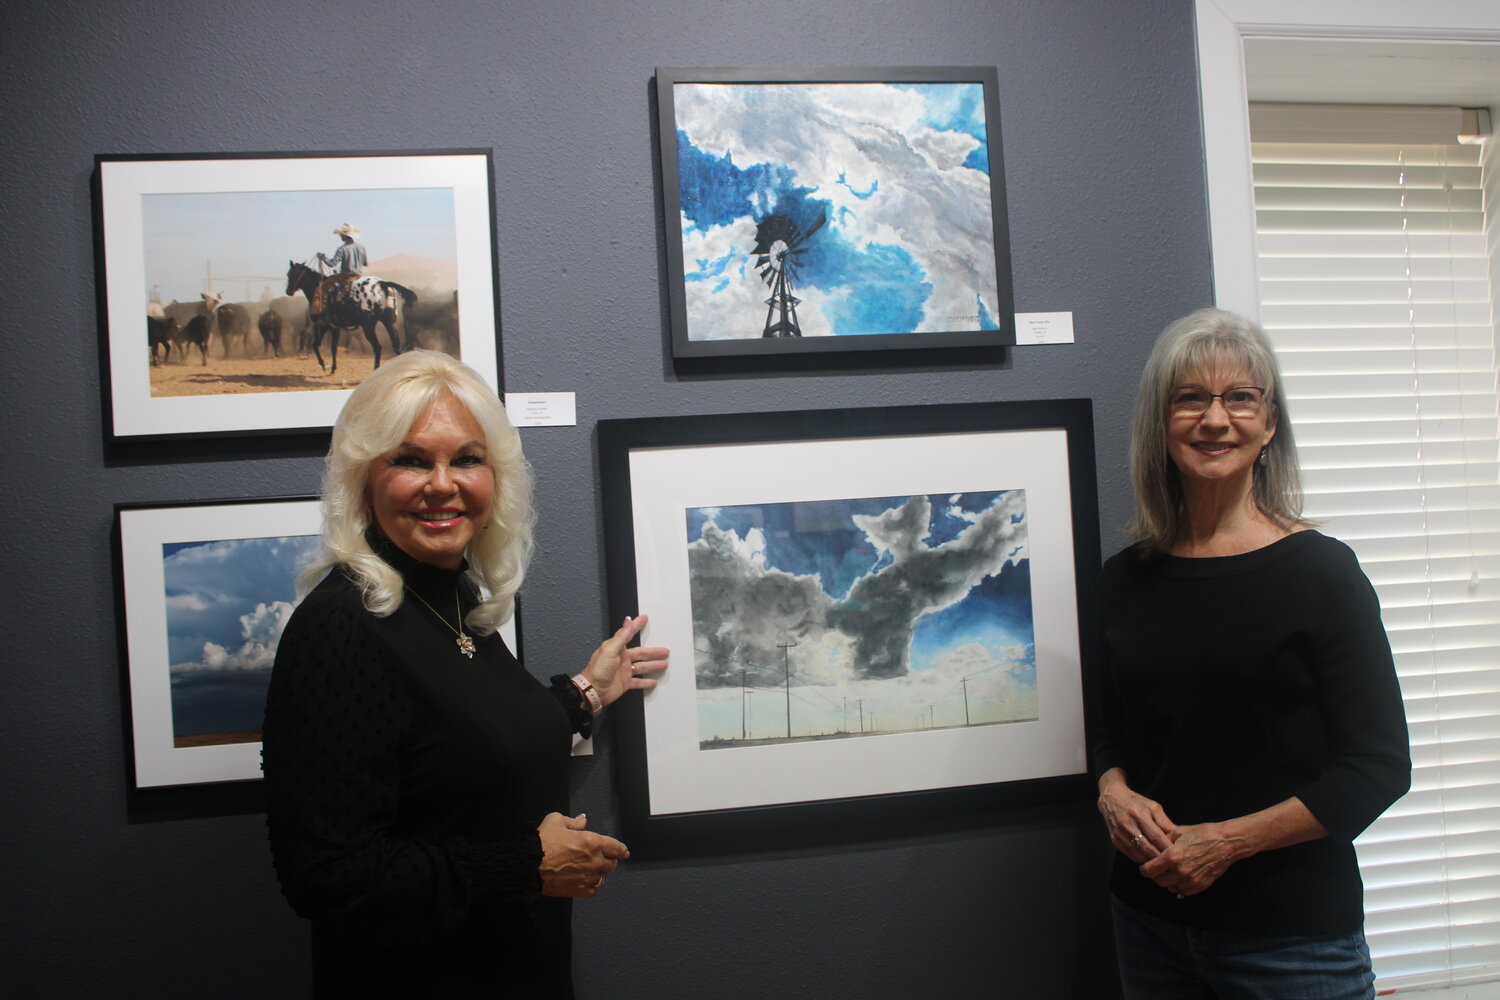 Vickie Guthrie, left, coordinator for the Lake Granbury Art Association Juried Fall Art Show, and Dawn Milson, right, published author and speaker, view some of the art pieces on display for the fall show at the Shanley House Gallery. The gallery will be open for guests to view the artwork through Oct. 29, on Monday through Saturday from 10 a.m. to 4 p.m. and Sunday from 1 to 4 p.m.